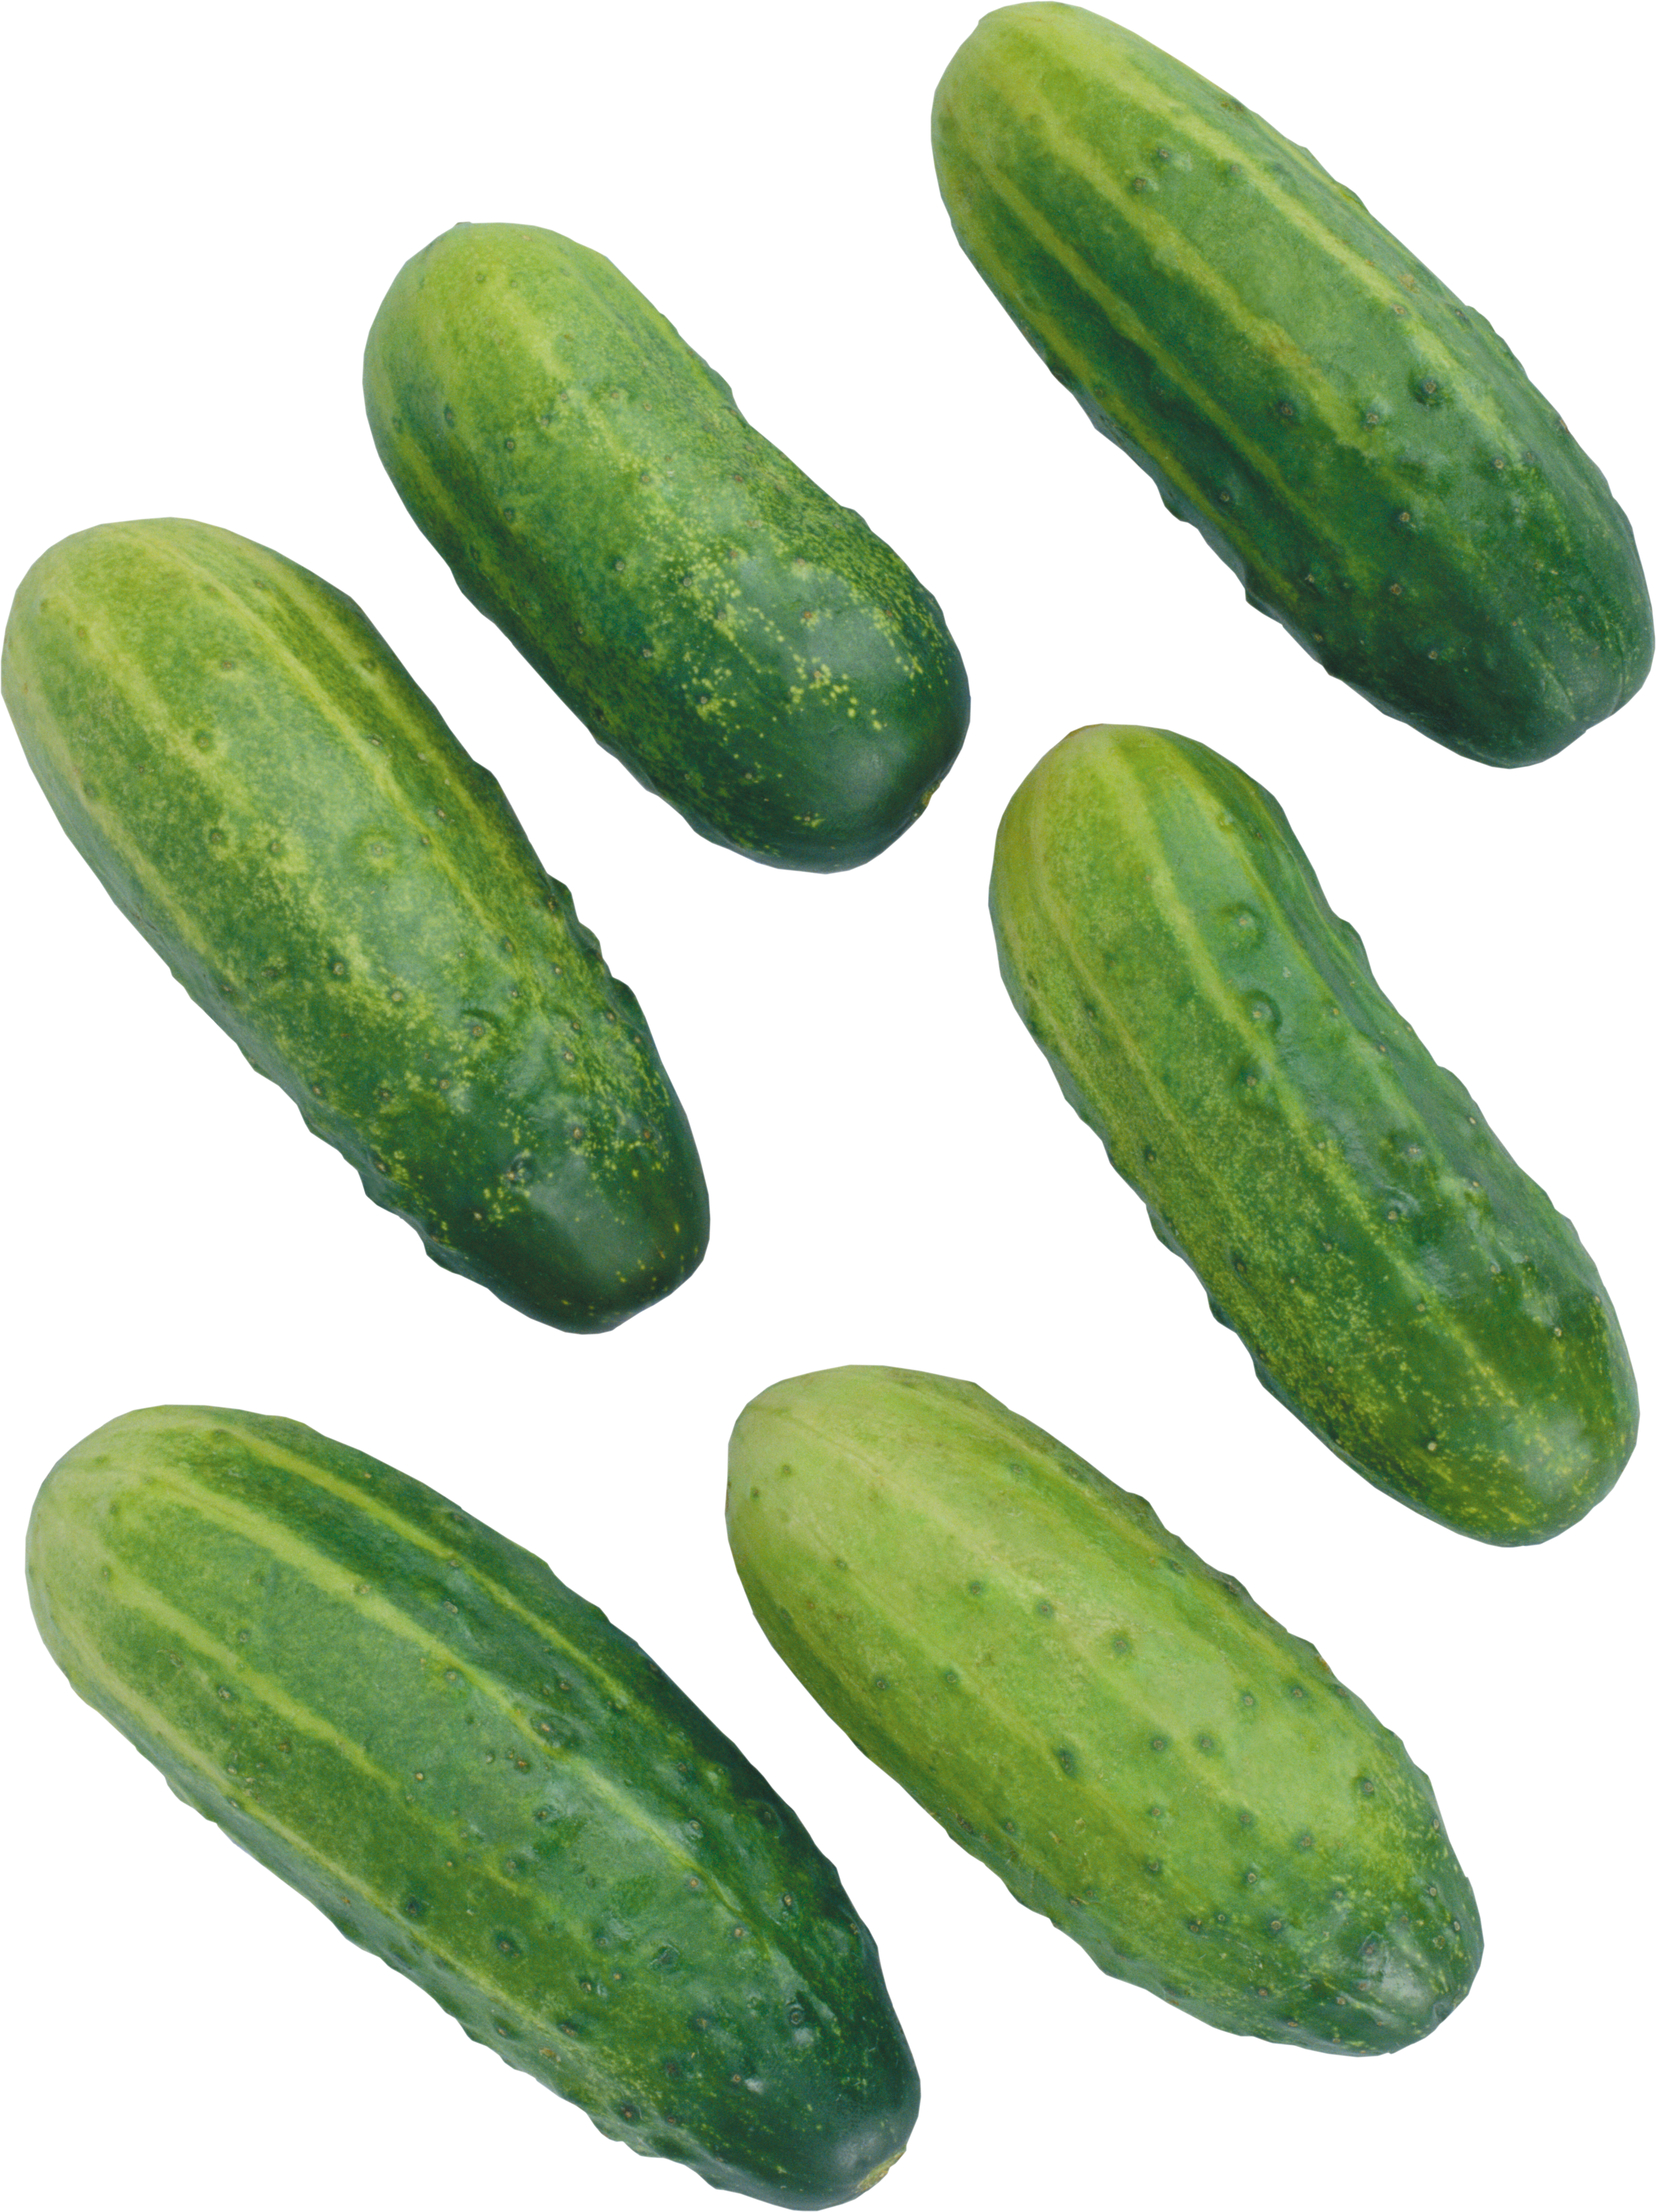 Cucumbers picture PNG